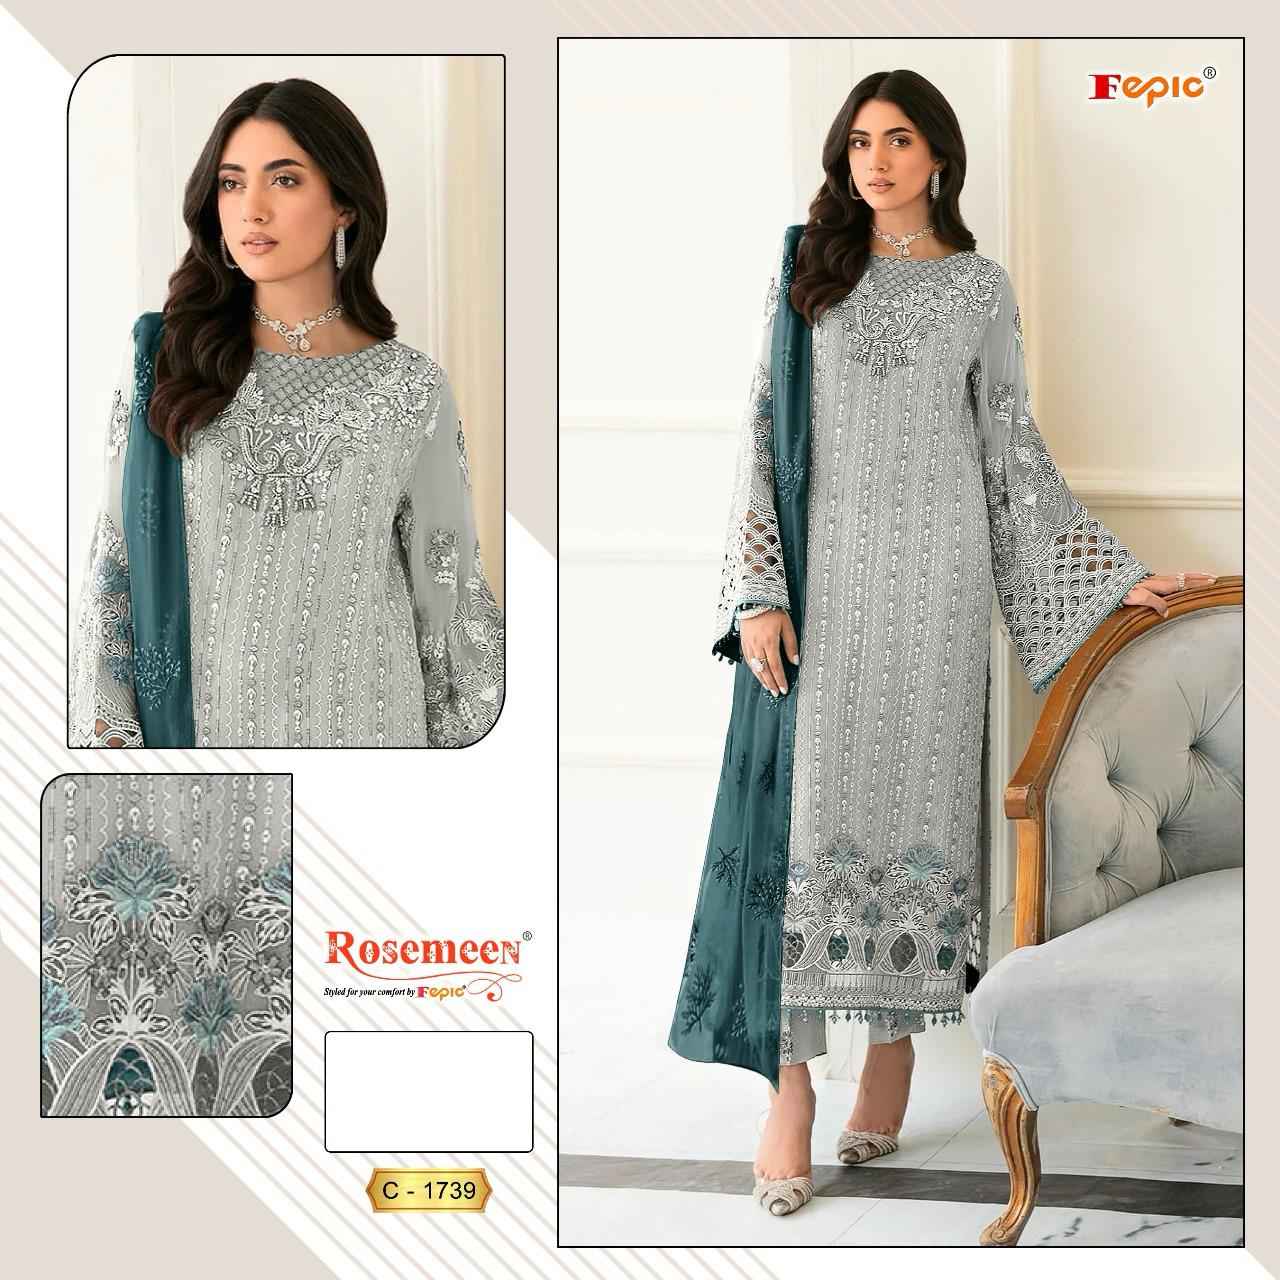 Fepic Rosemeen C-1739 Georgette Embroidered Dress Material (4 Pc Catalog)